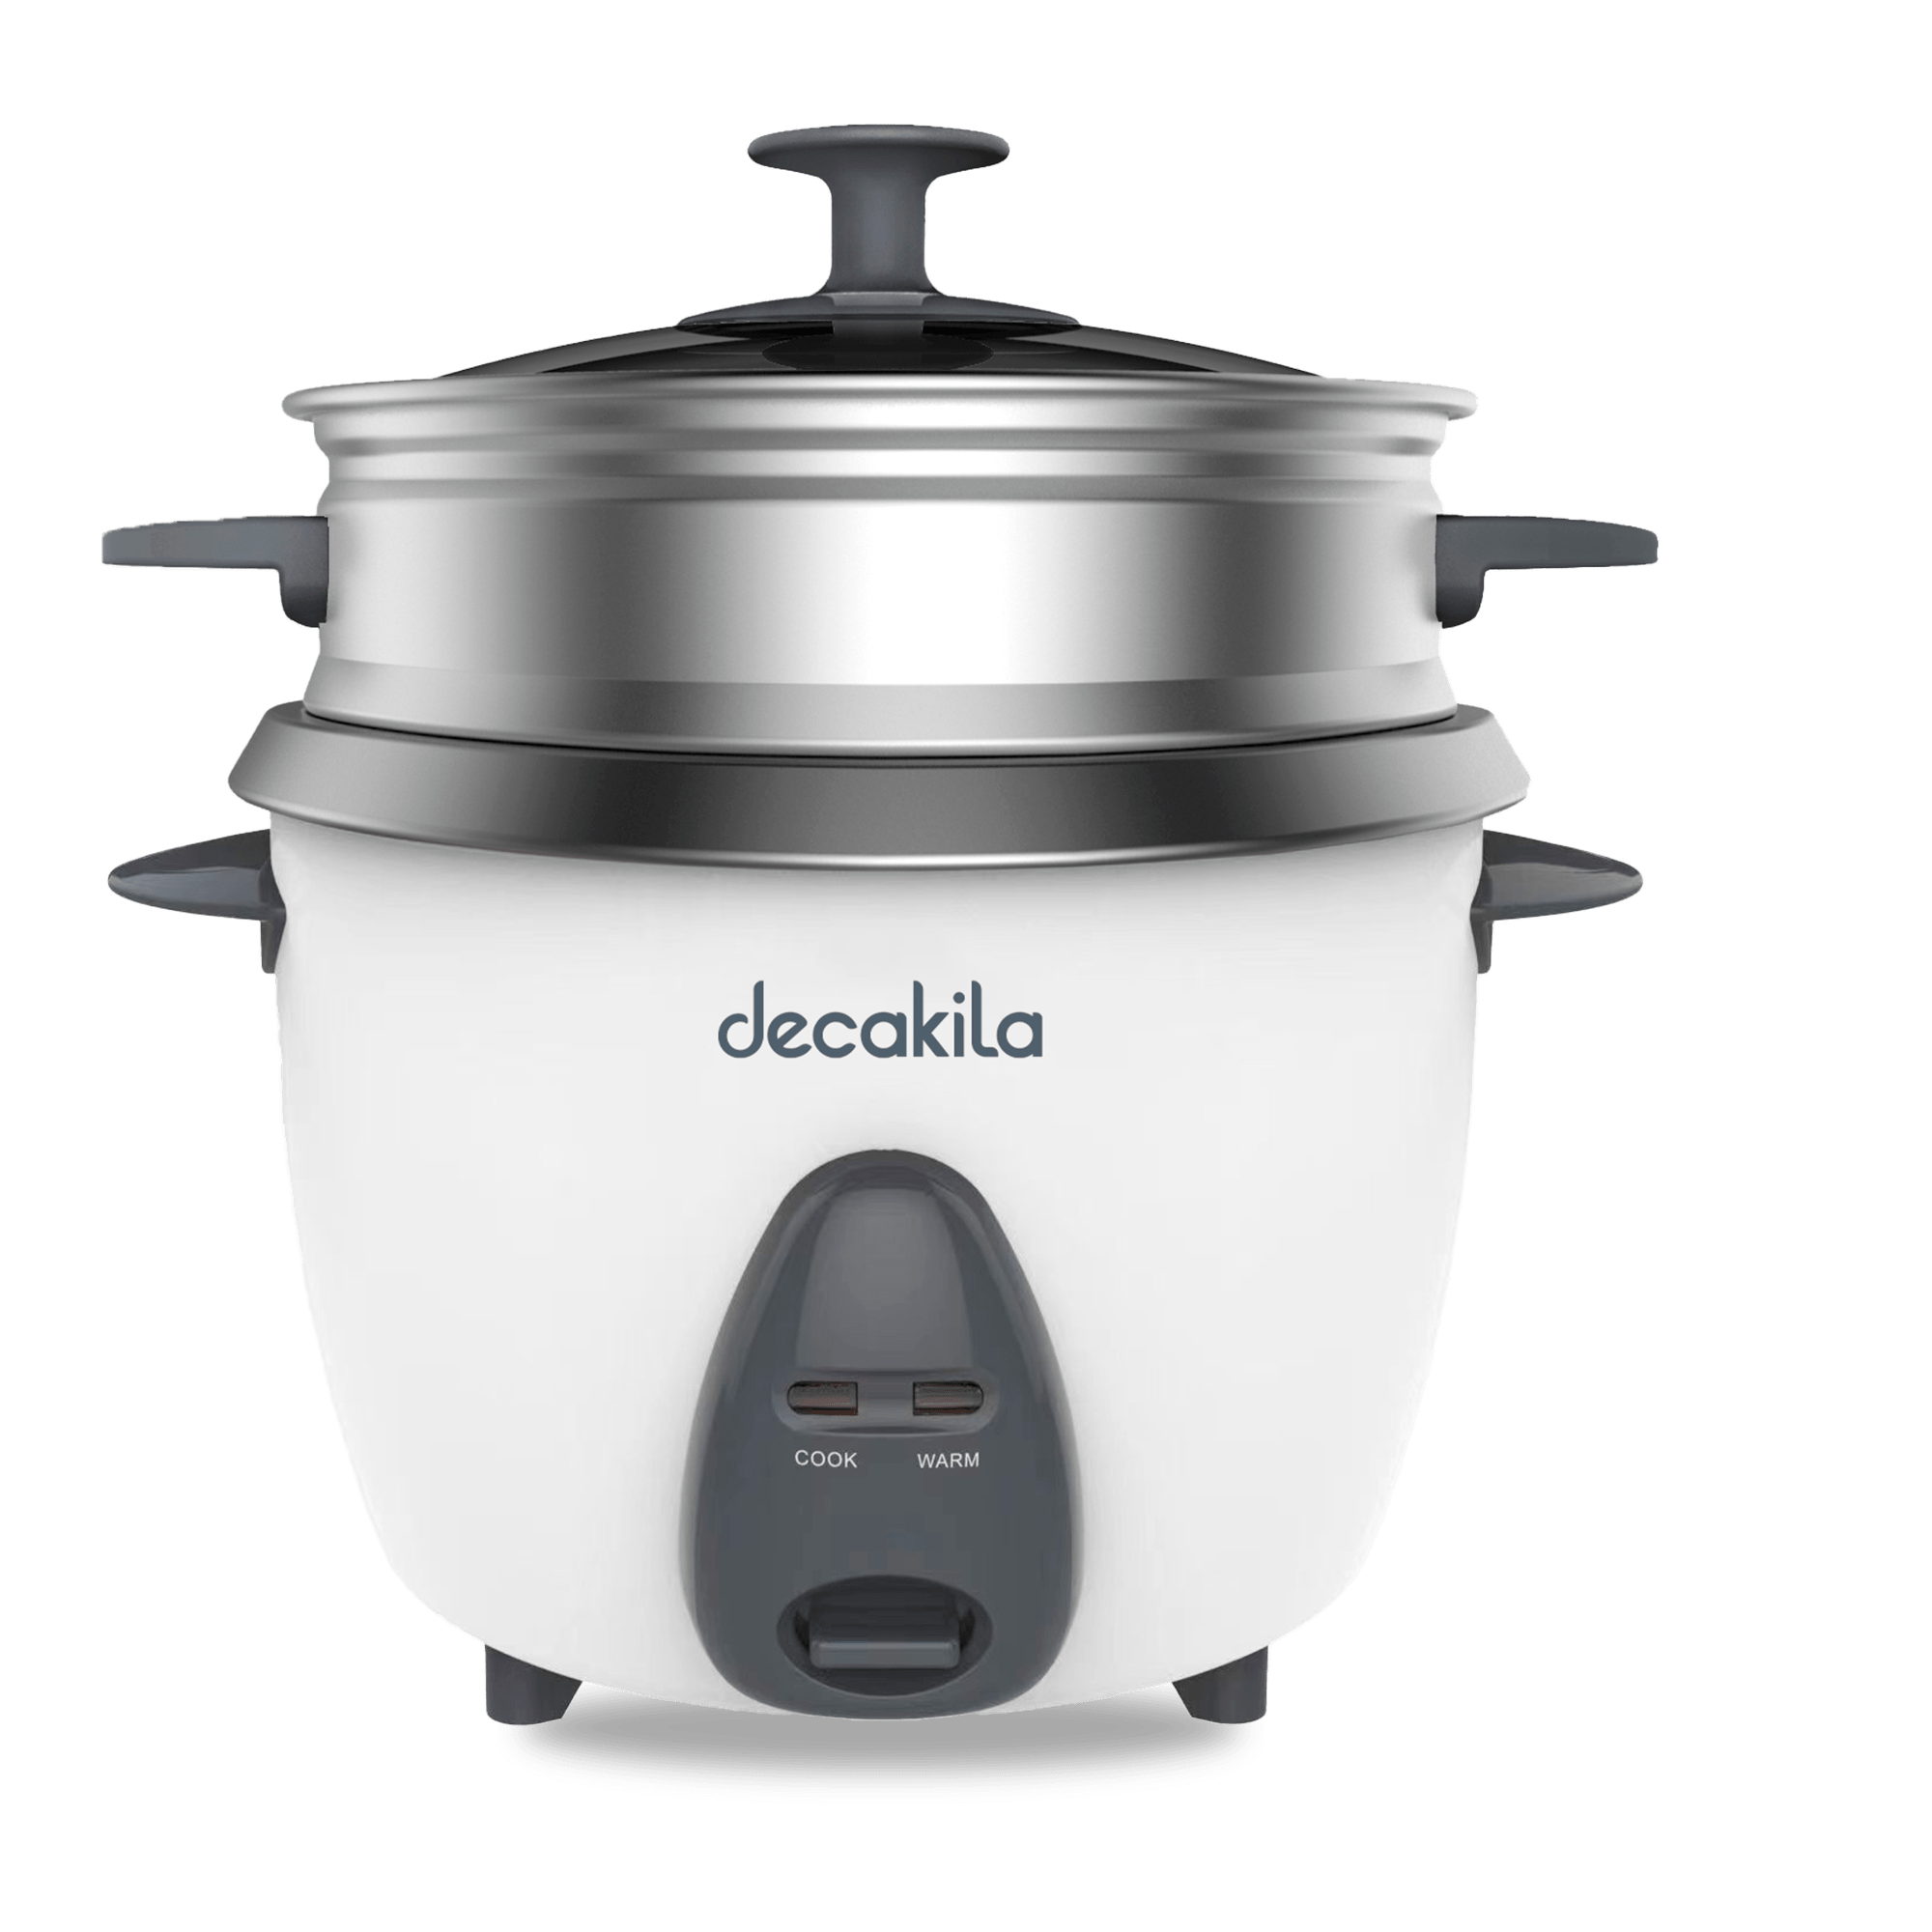 Decakila 2.8L Rice Cooker 900W - KEER035W | Buy Online in Accra, Ghana - Supply Master Kitchen Appliances Buy Tools hardware Building materials